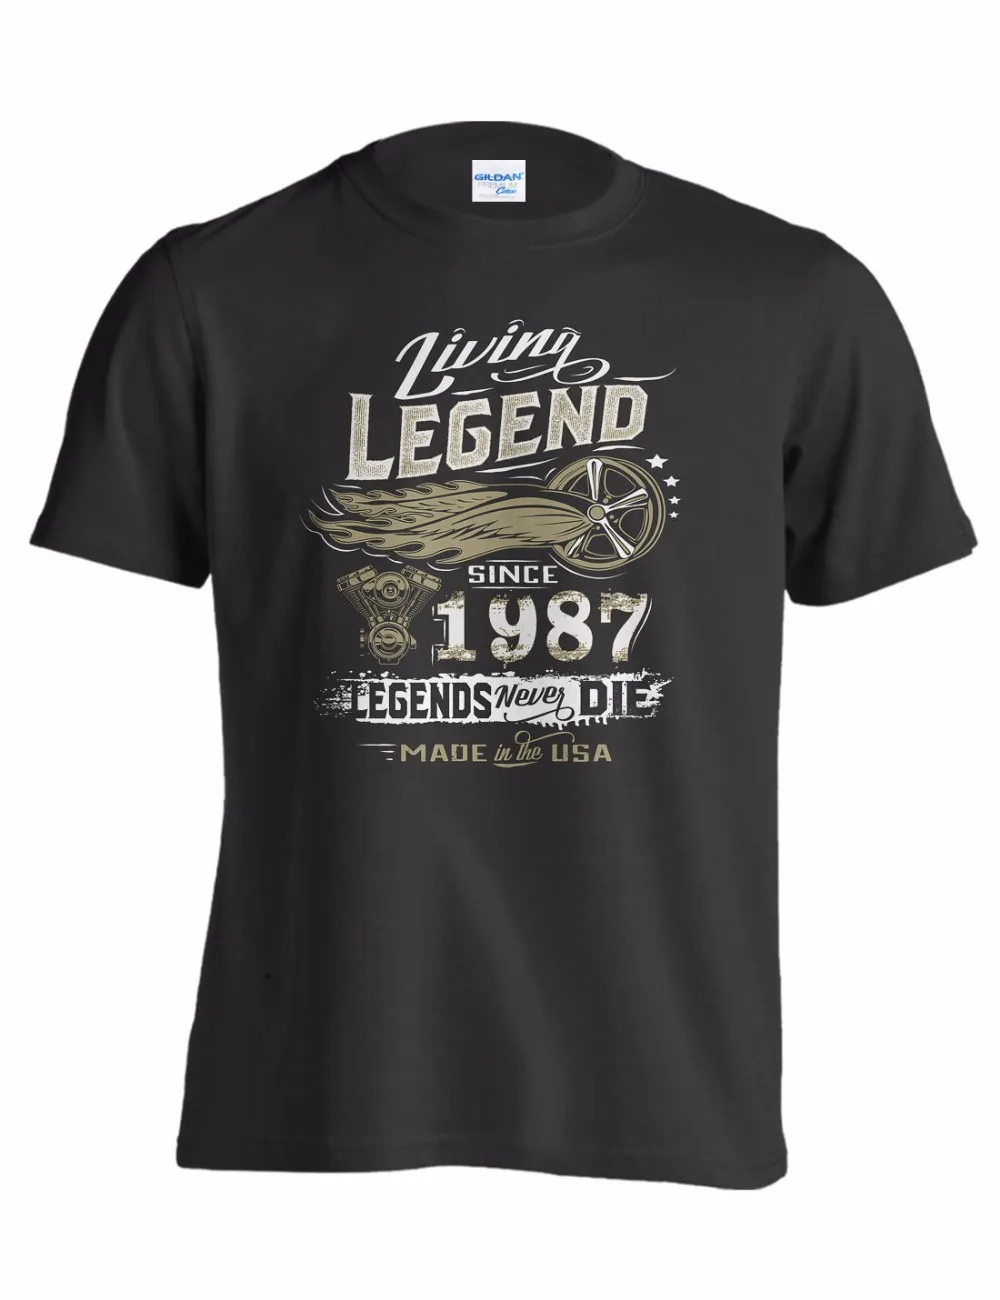 

Design T Shirt New Tee shirts tops Living Legend 30th Birthday Gift T-Shirt for those Born in 1987